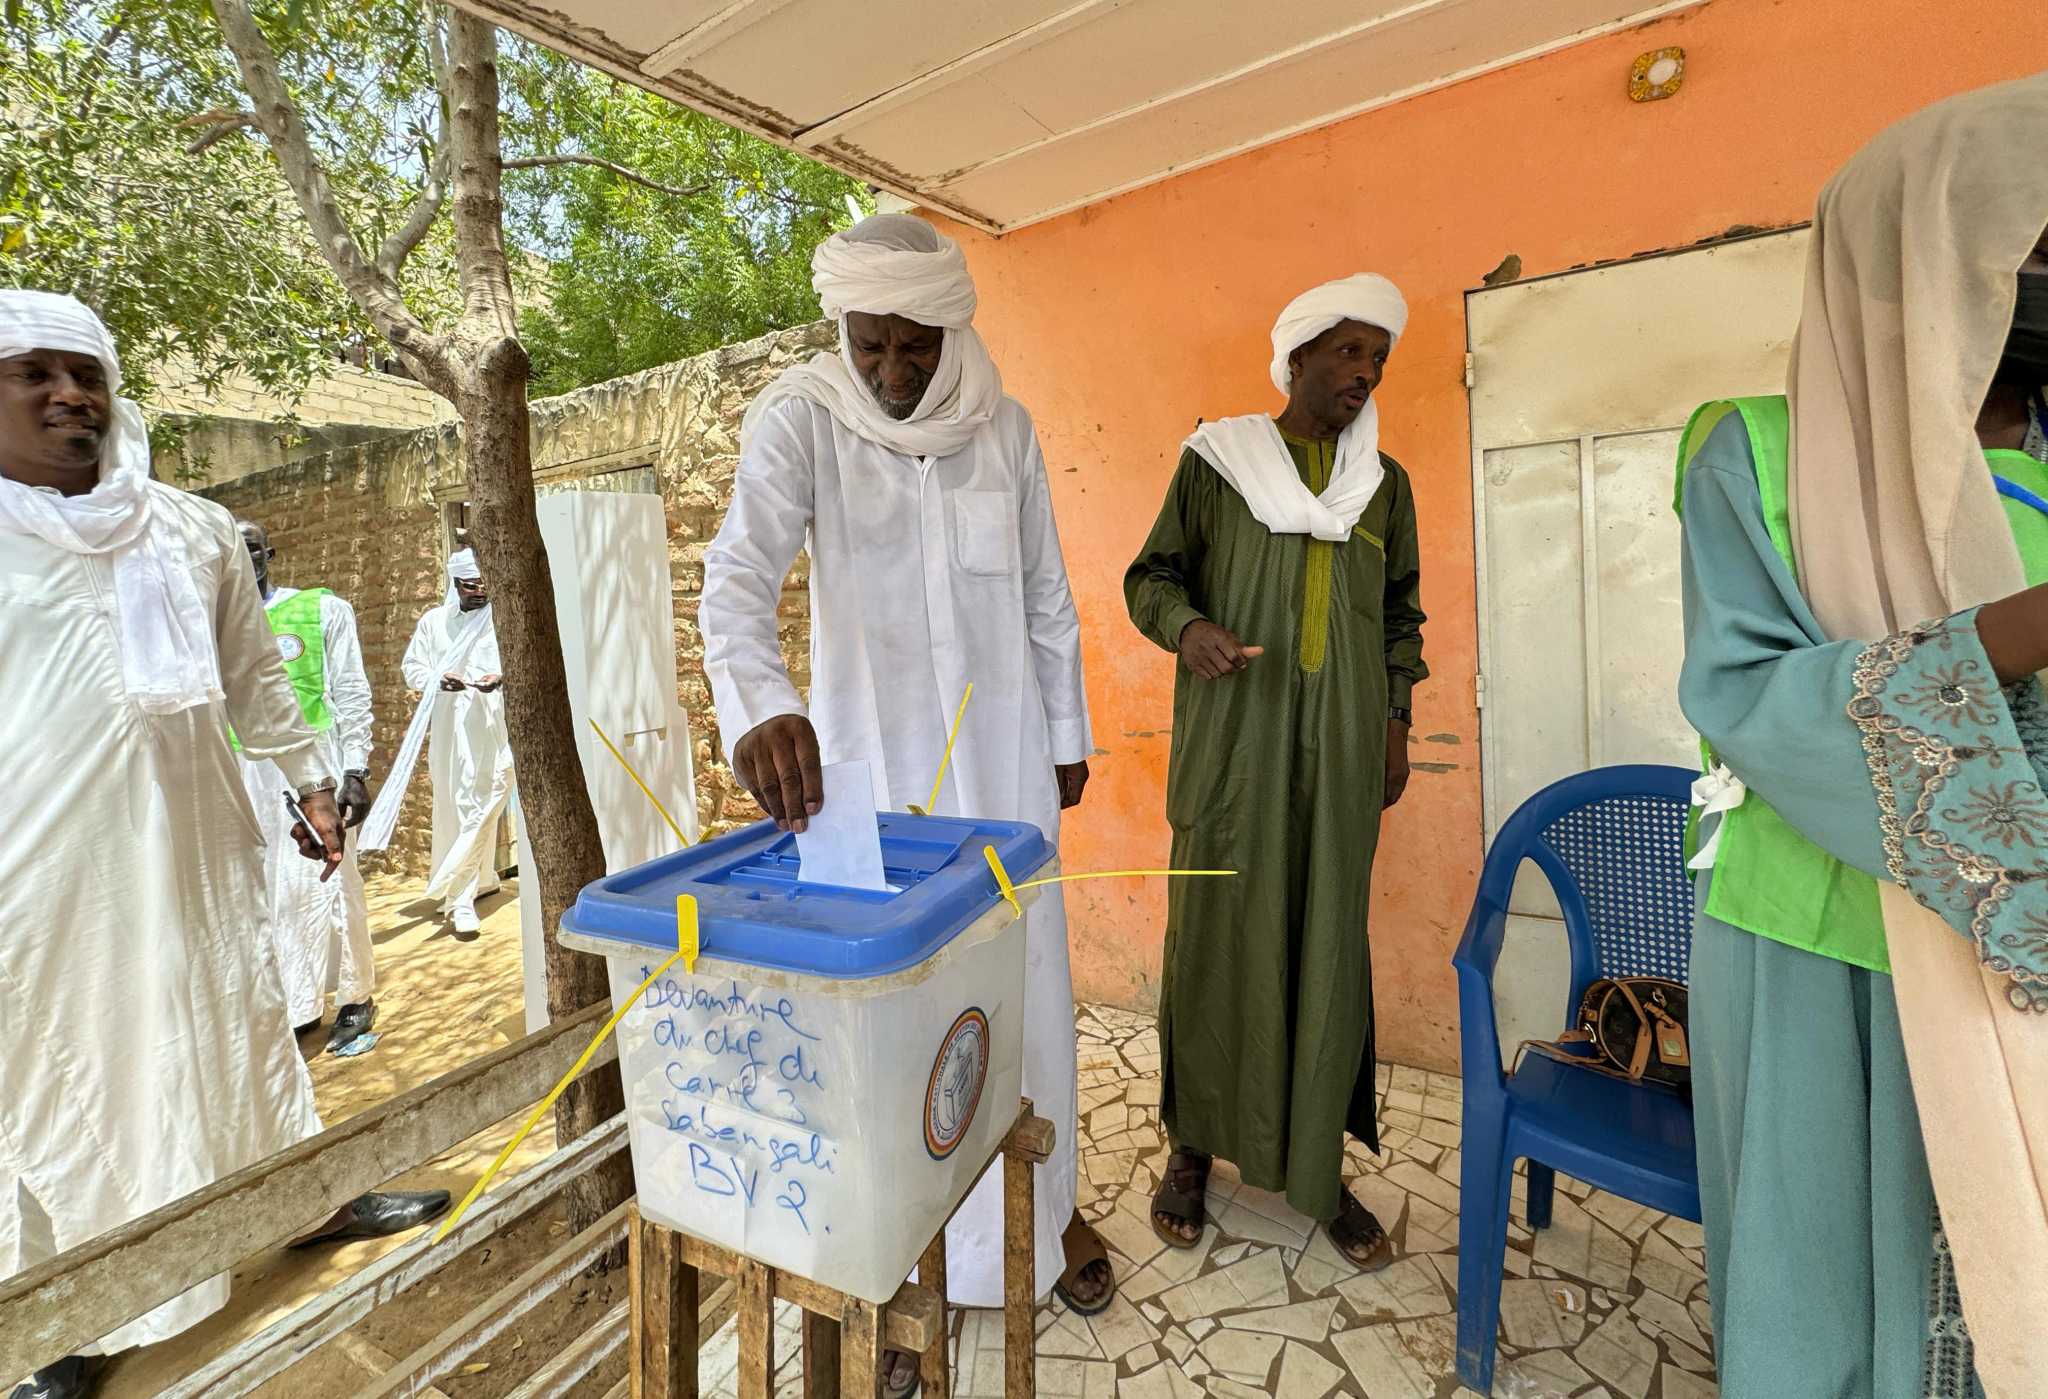 Chad's military ruler declared winner of presidential election, while opposition disputes the result